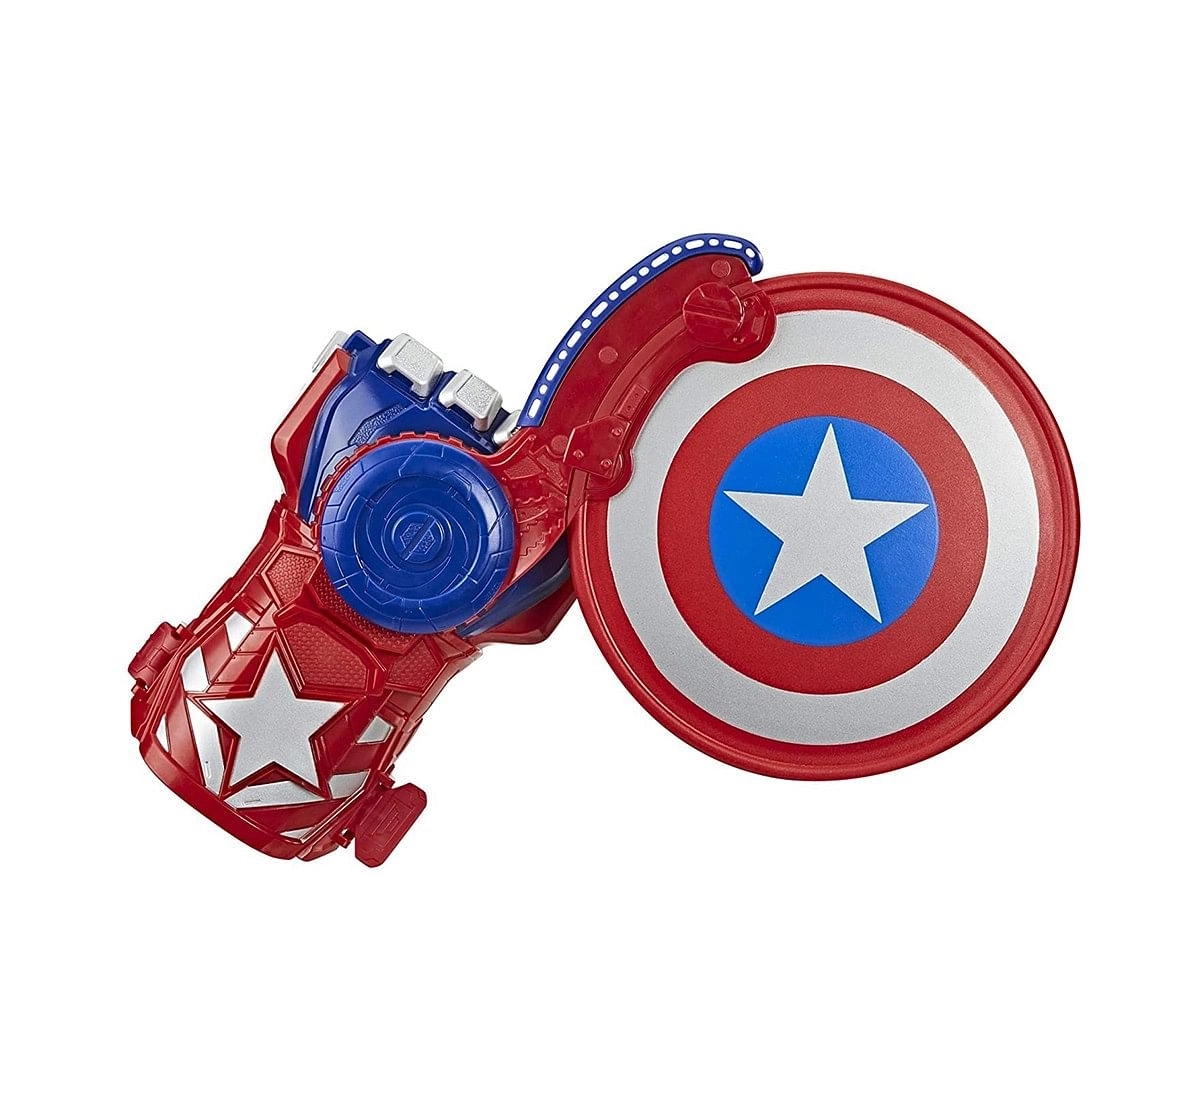 Marvel Nerf Power Moves Avengers Captain America Shield Action Figure Play Sets for Kids age 5Y+ 